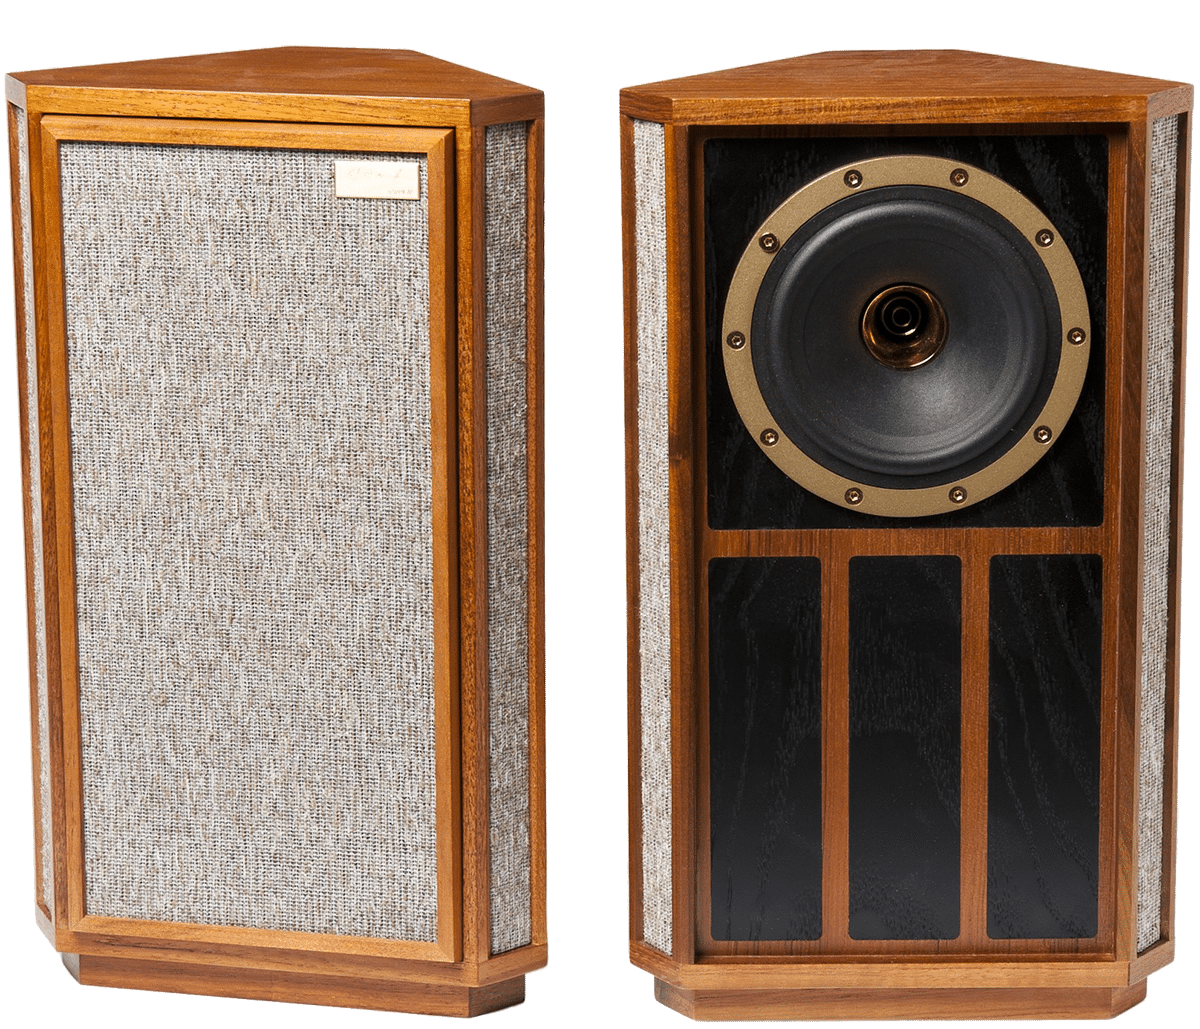 Tannoy Autograph Mini. Tannoy Gold 8. Tannoy Gold 5. Tannoy Gold 7.